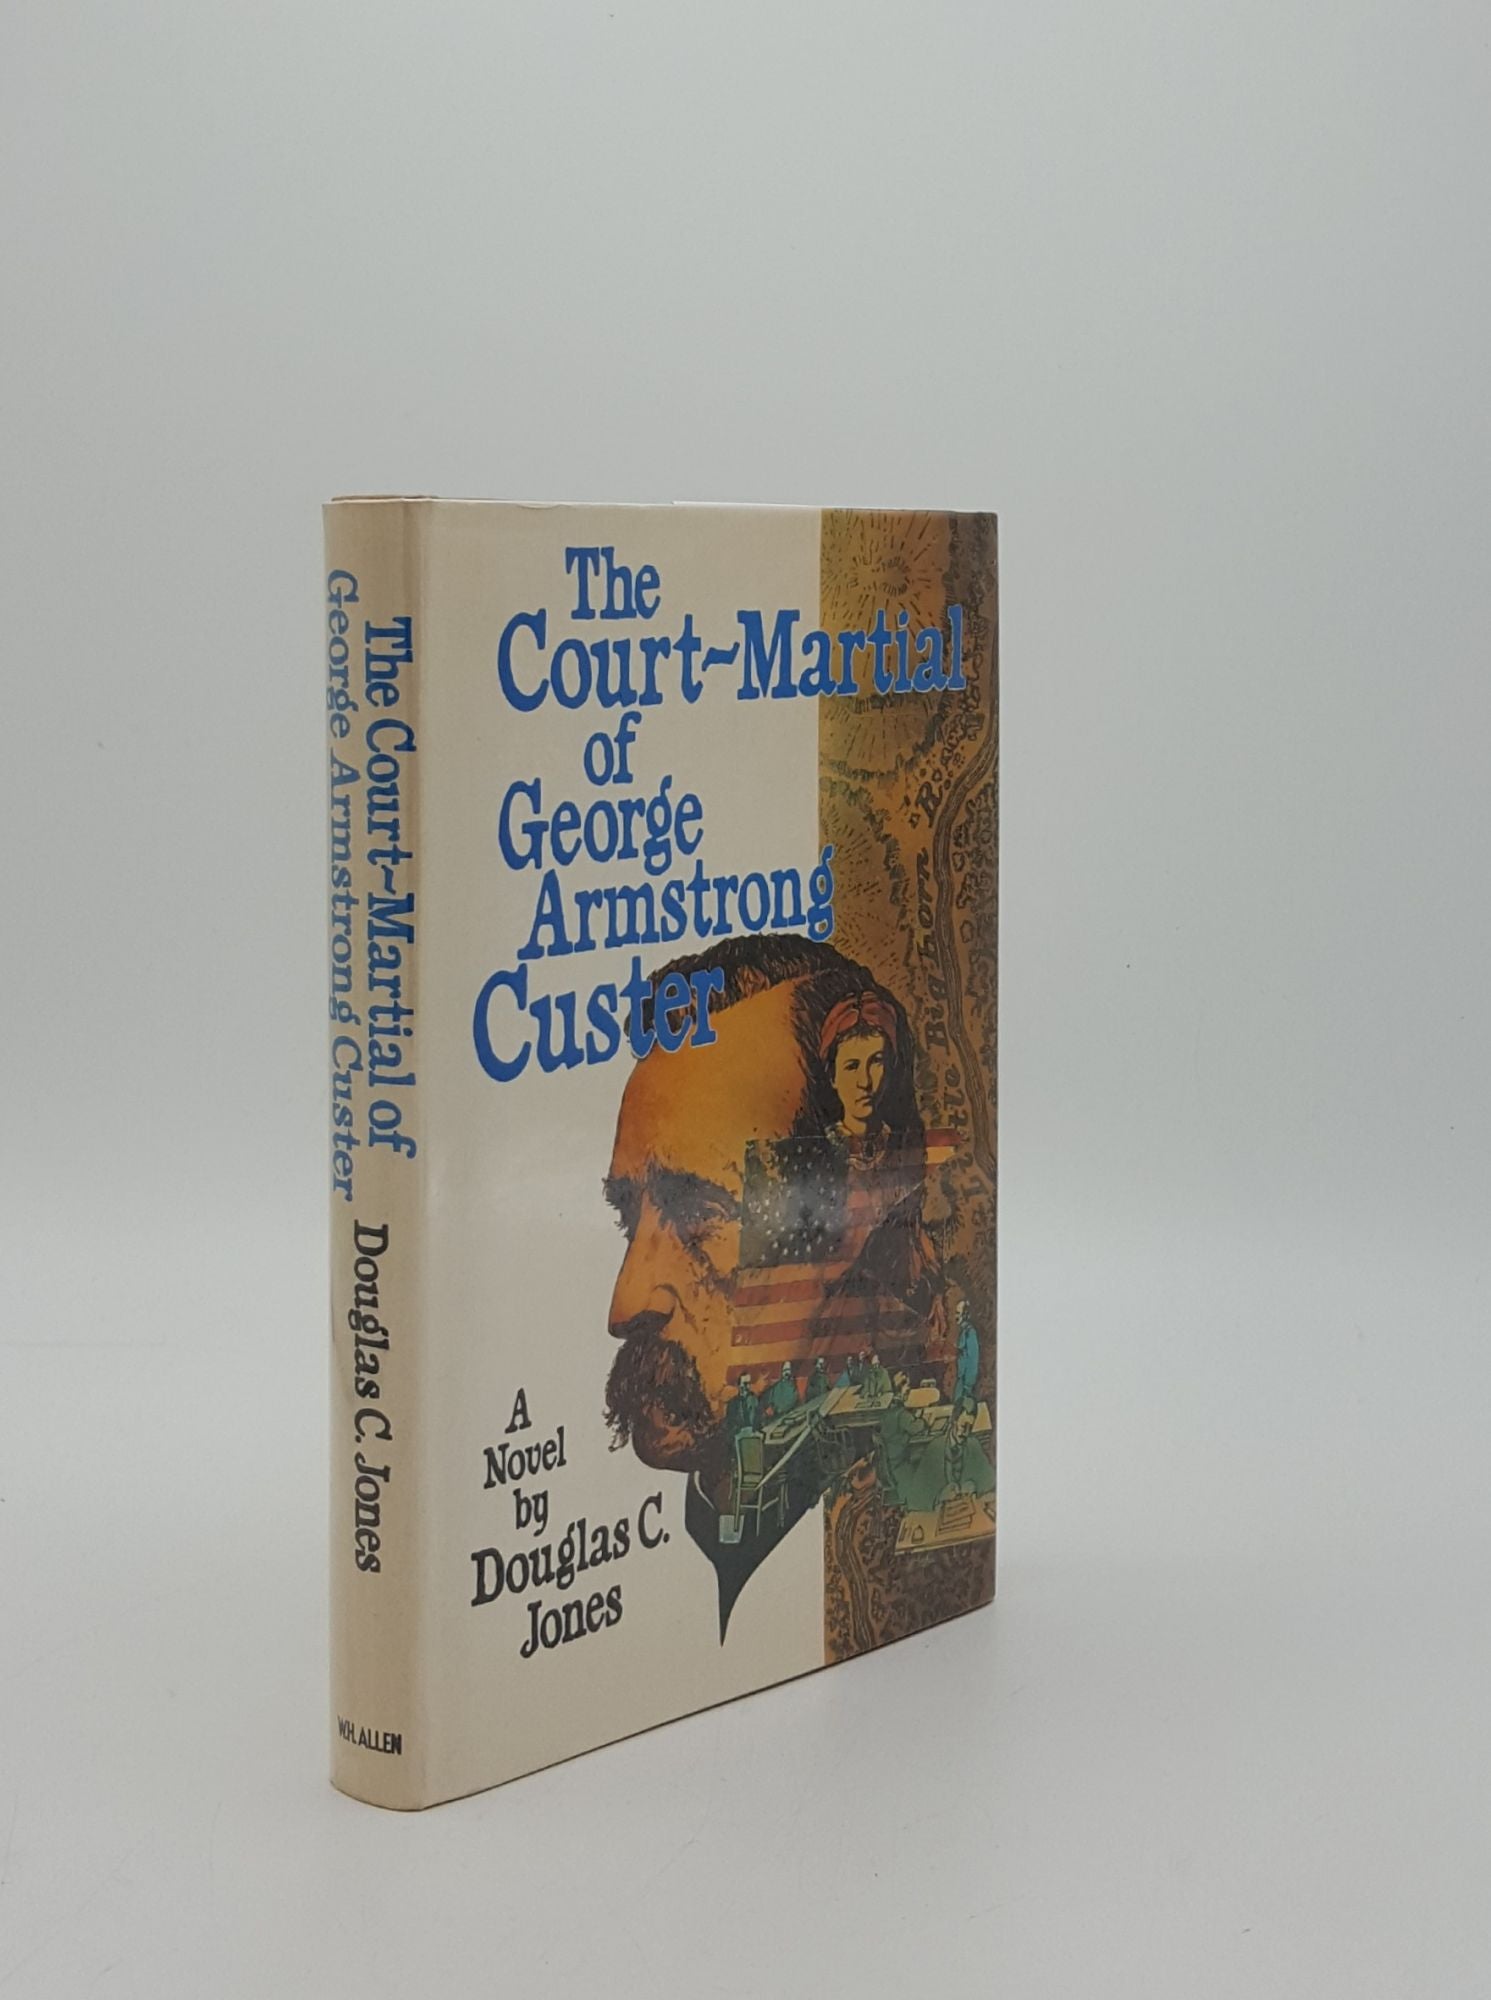 JONES Douglas C. - The Court-Martial of George Armstrong Custer